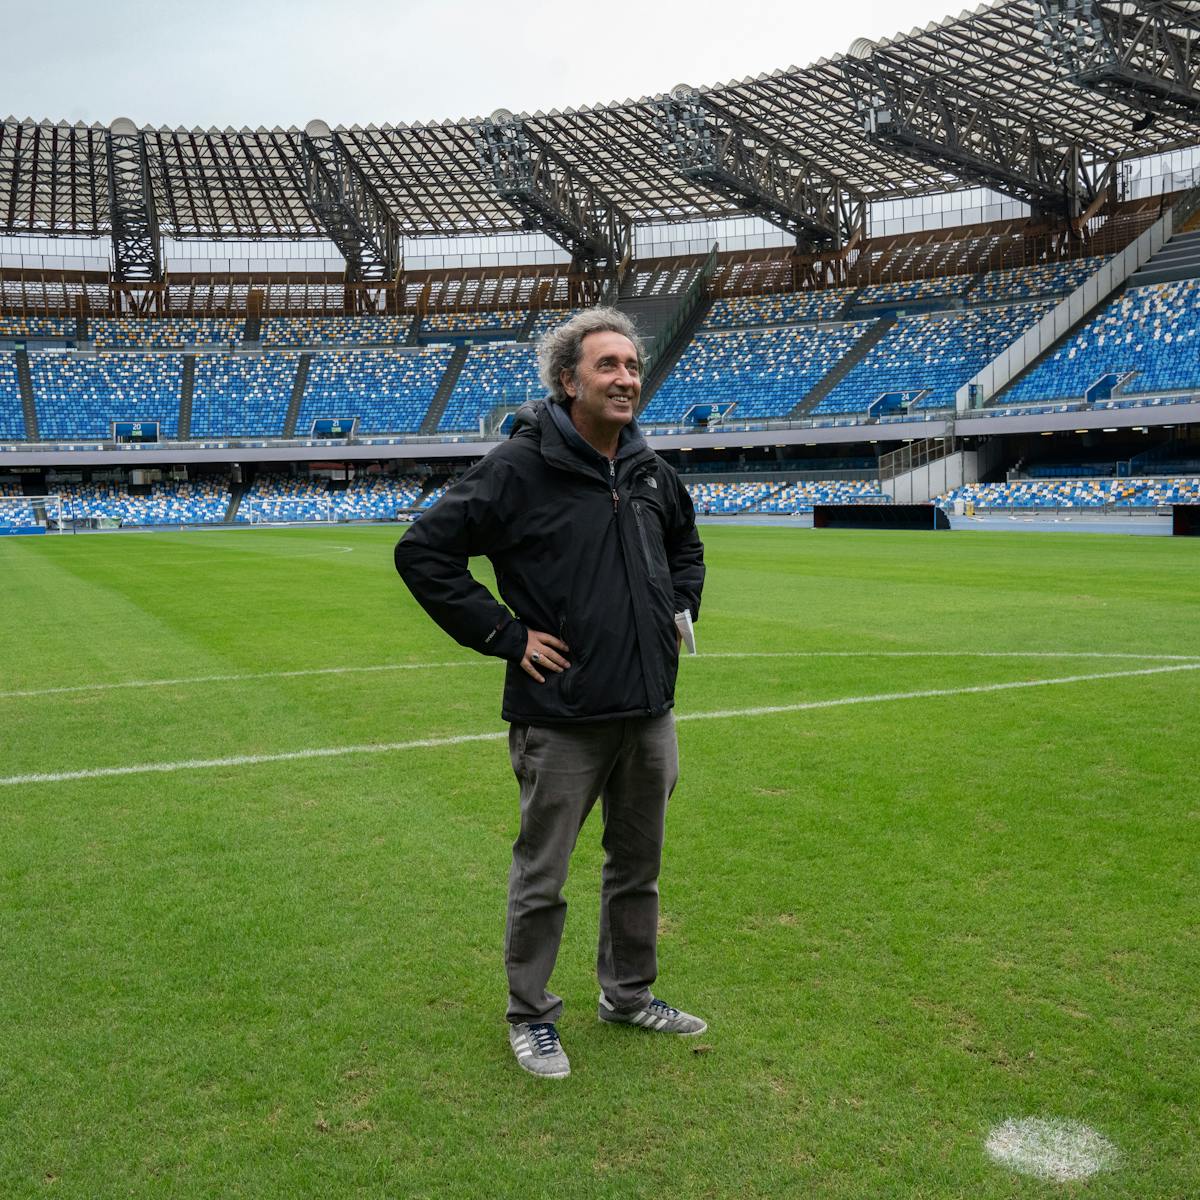 Paolo Sorrentino stands on a football pitch, hands on hips.